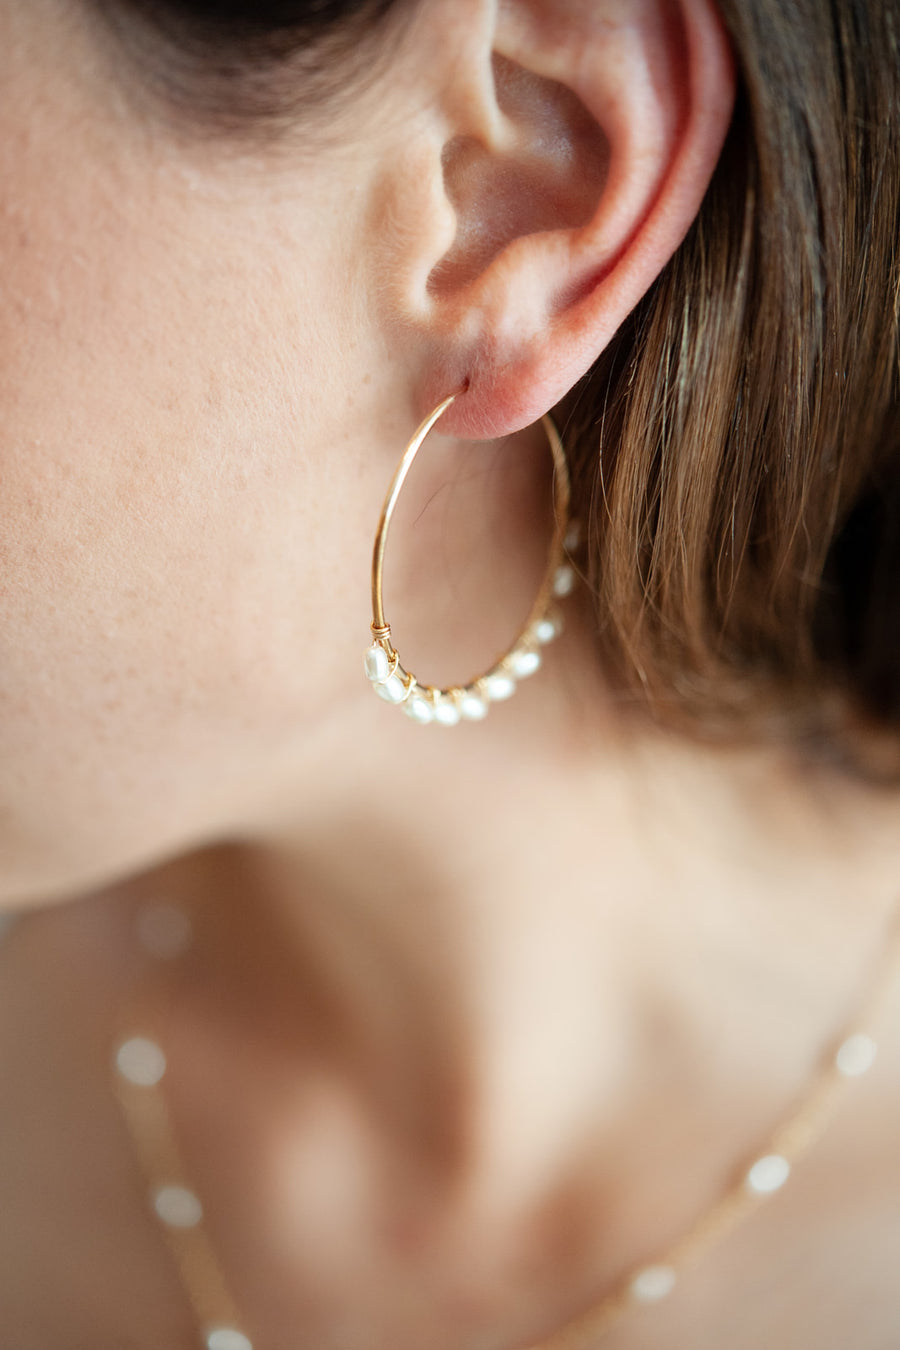 Coco 14kt Goldfill and Pearl Hoop Earrings